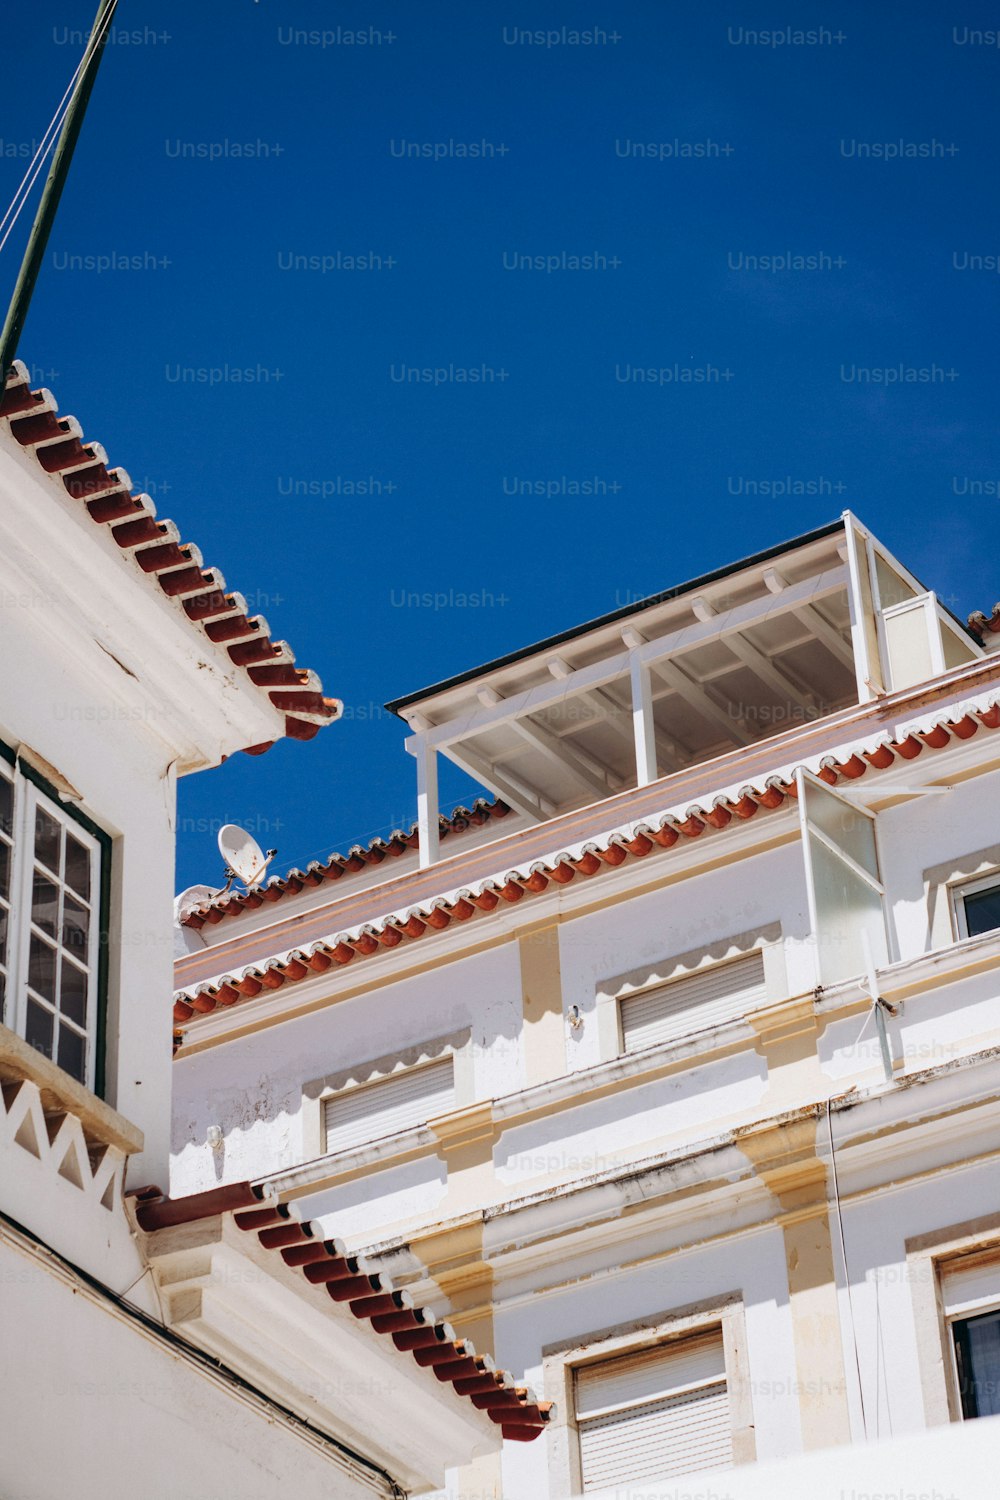 a bird is perched on the roof of a building